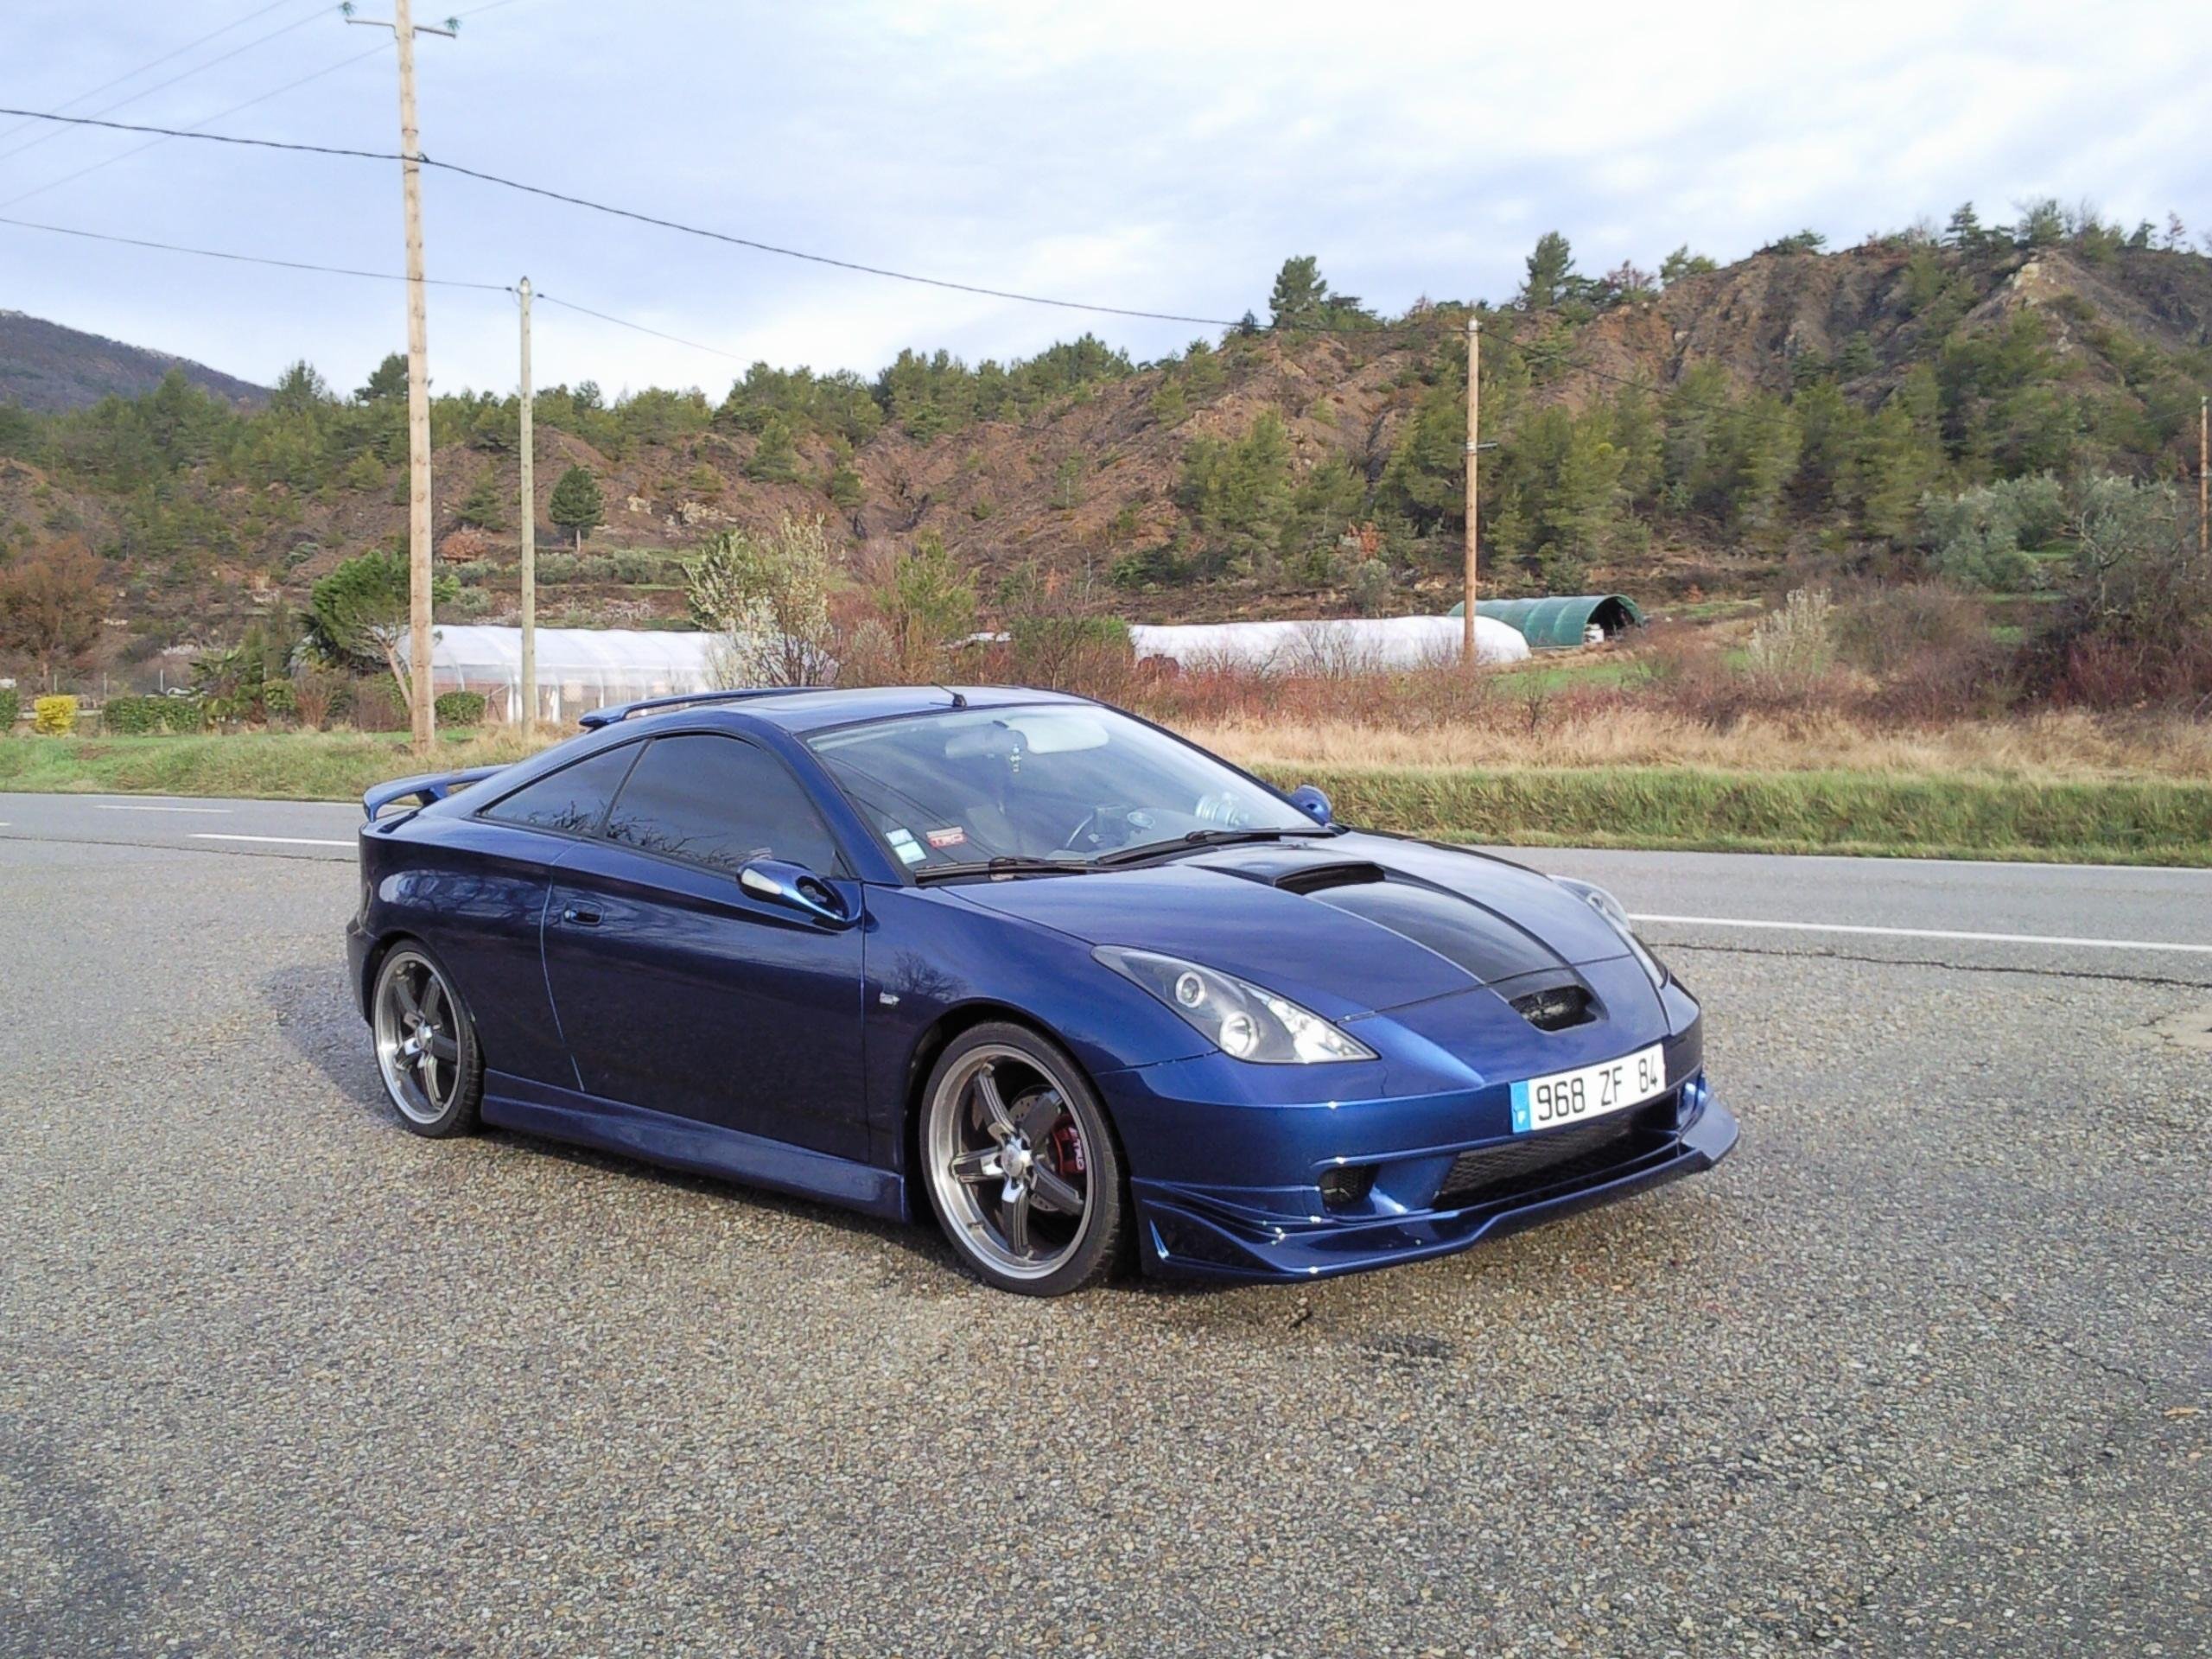 toyota, Celica, Cars, Coupe, Japan Wallpapers HD / Desktop and Mobile ...